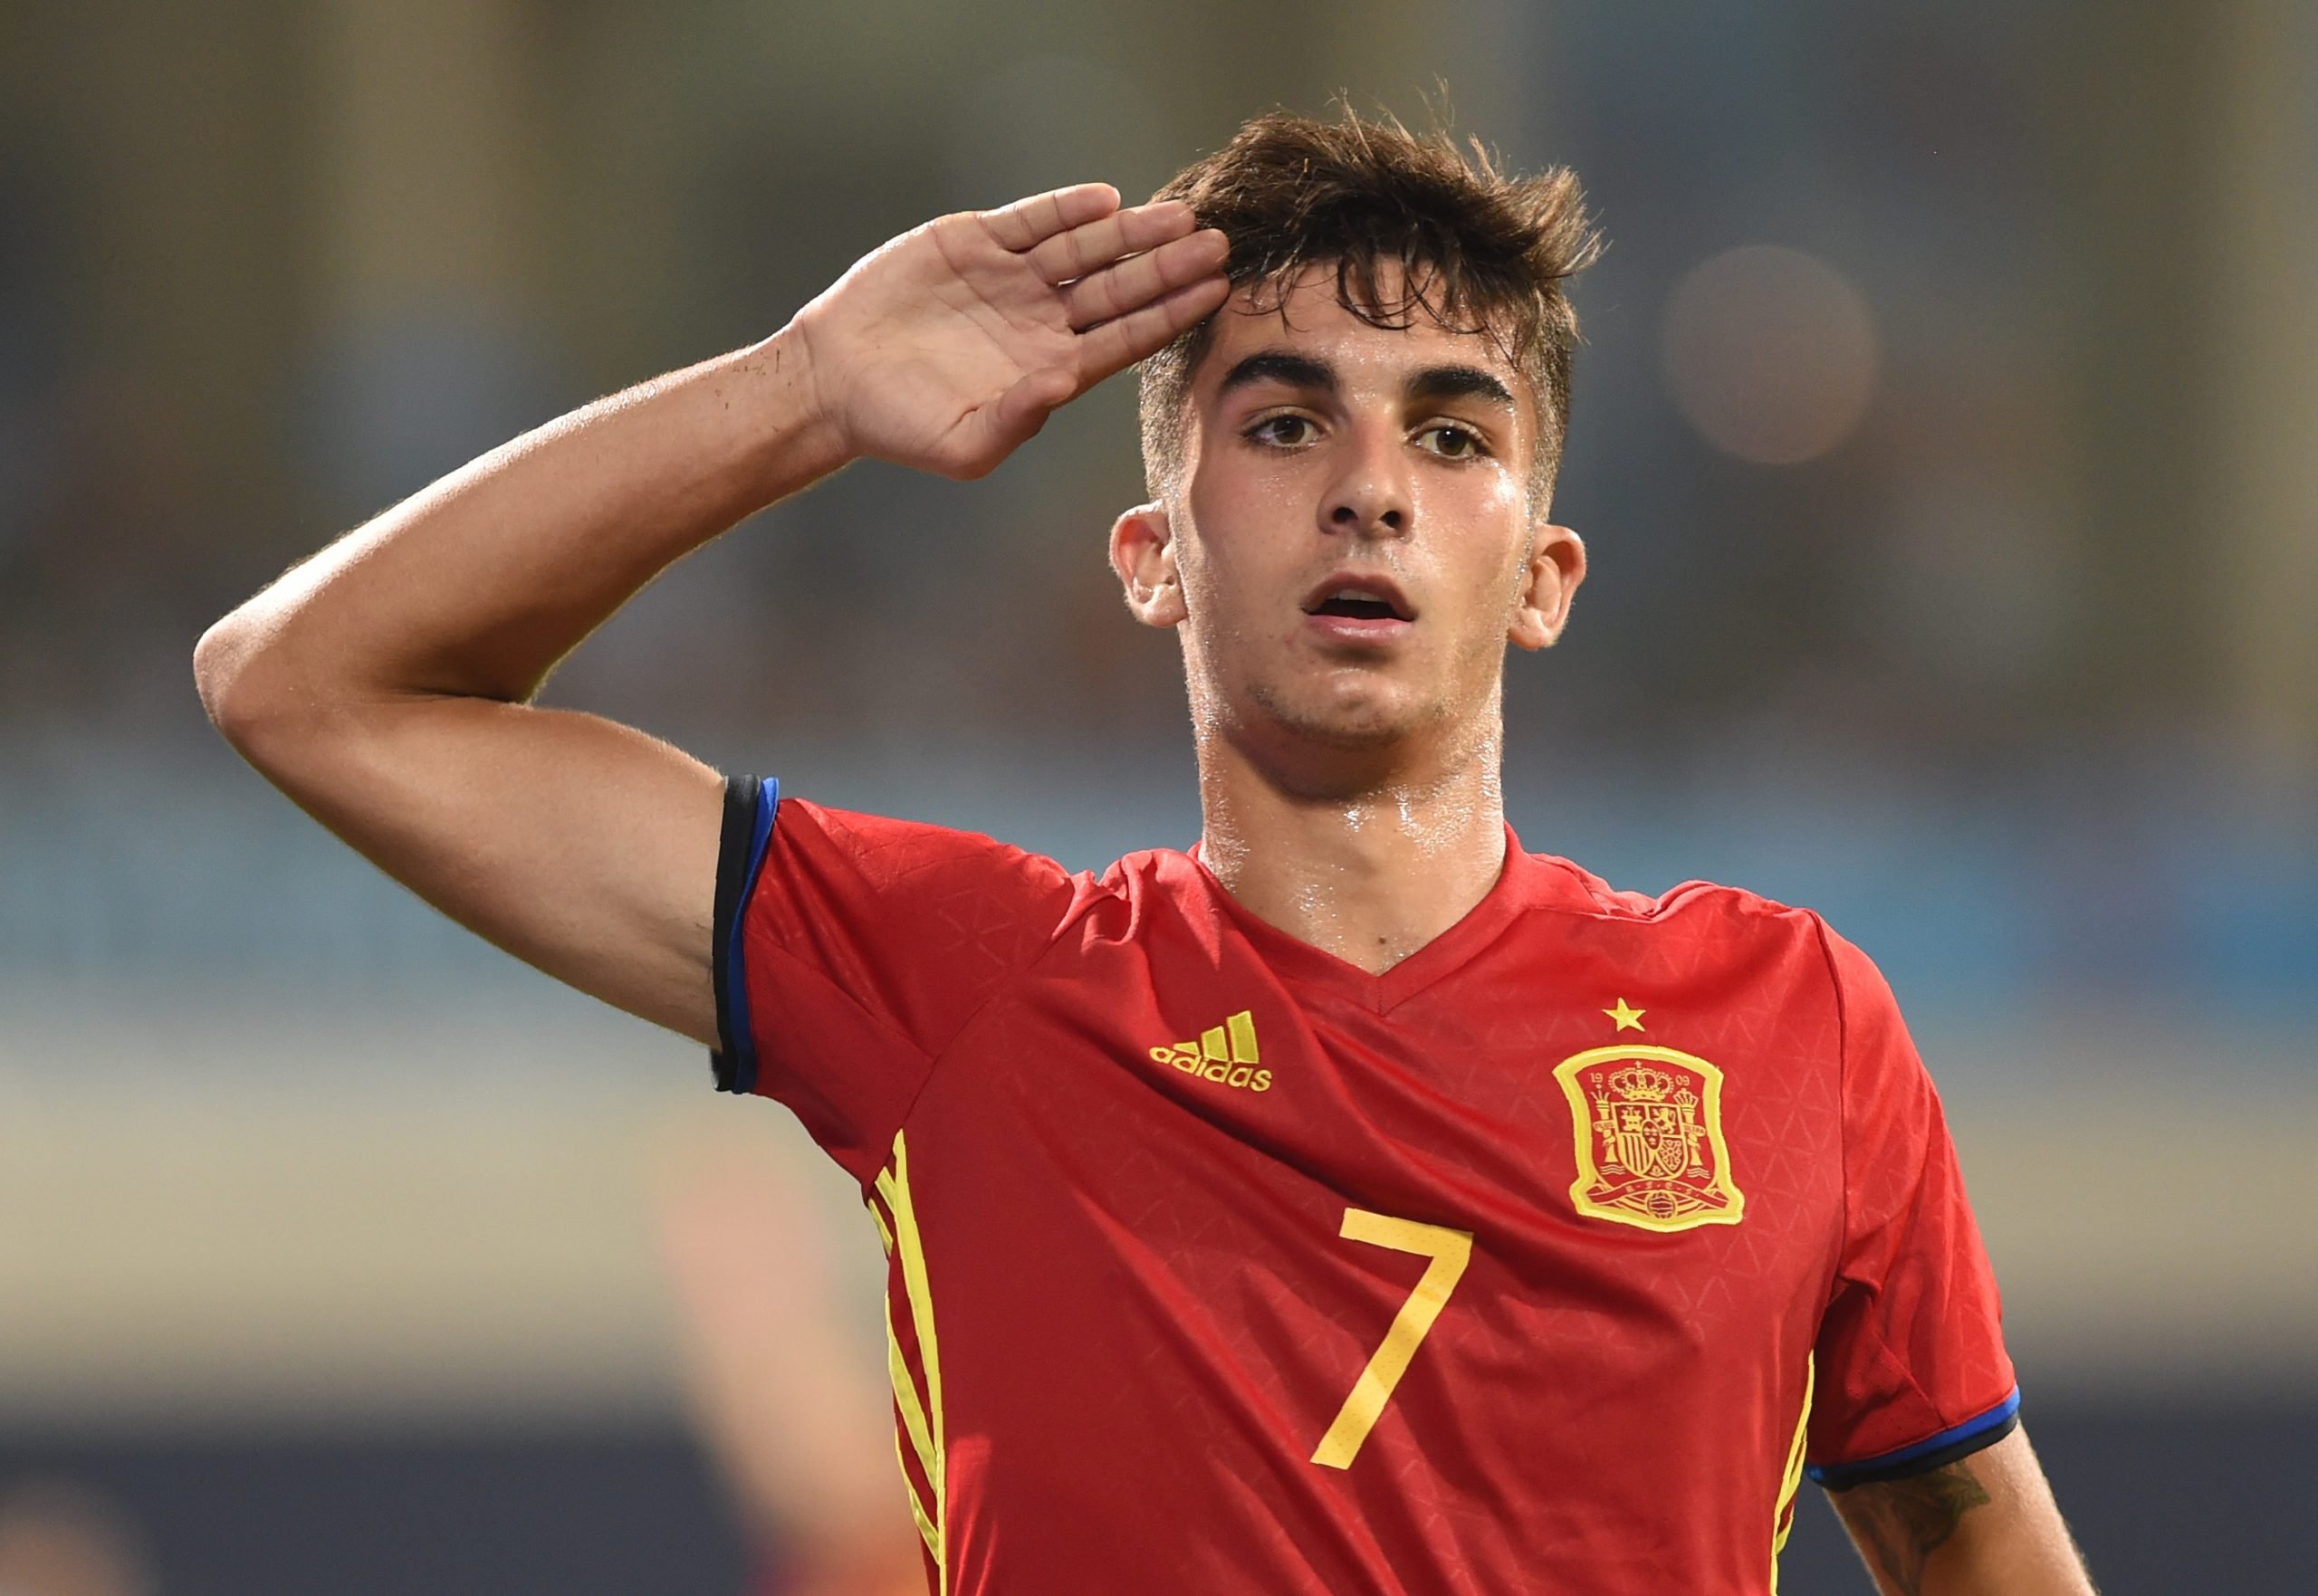 Ferran Torres of Spain celebrates after scoring a goal during the second semi final football match between Mali and Spain in the FIFA U-17 World Cup at the D.Y.Patil stadium in Navi Mumbai on October 25, 2017. / AFP PHOTO / PUNIT PARANJPE        (Photo credit should read PUNIT PARANJPE/AFP/Getty Images)